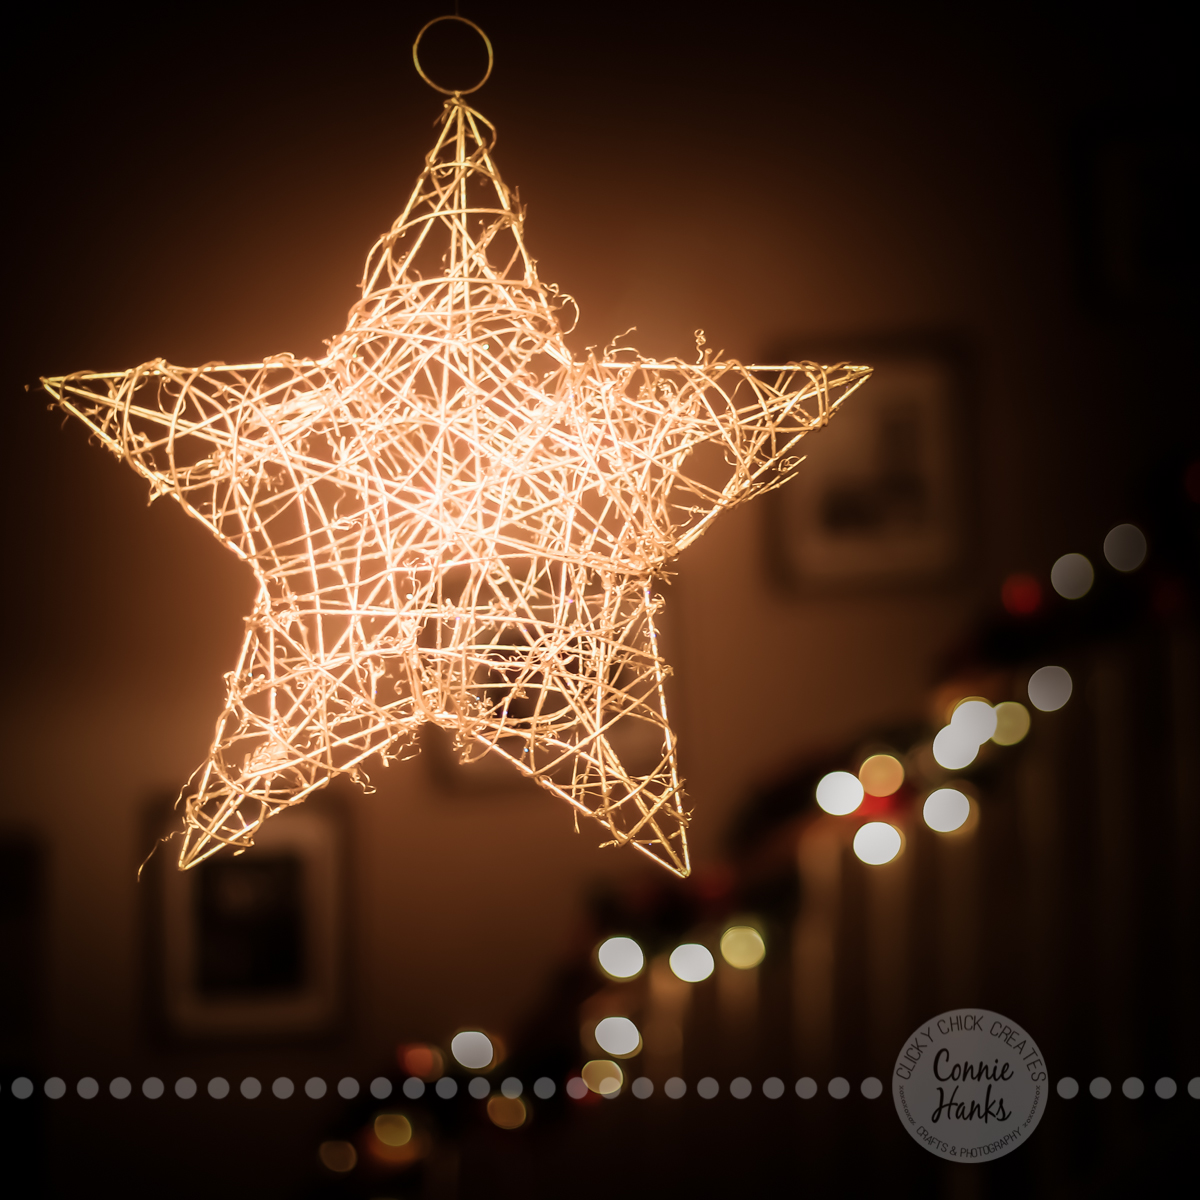 Connie Hanks Photography // ClickyChickCreates.com // Christmas, bokeh, star, straw, twig art, stairs, banister, decor